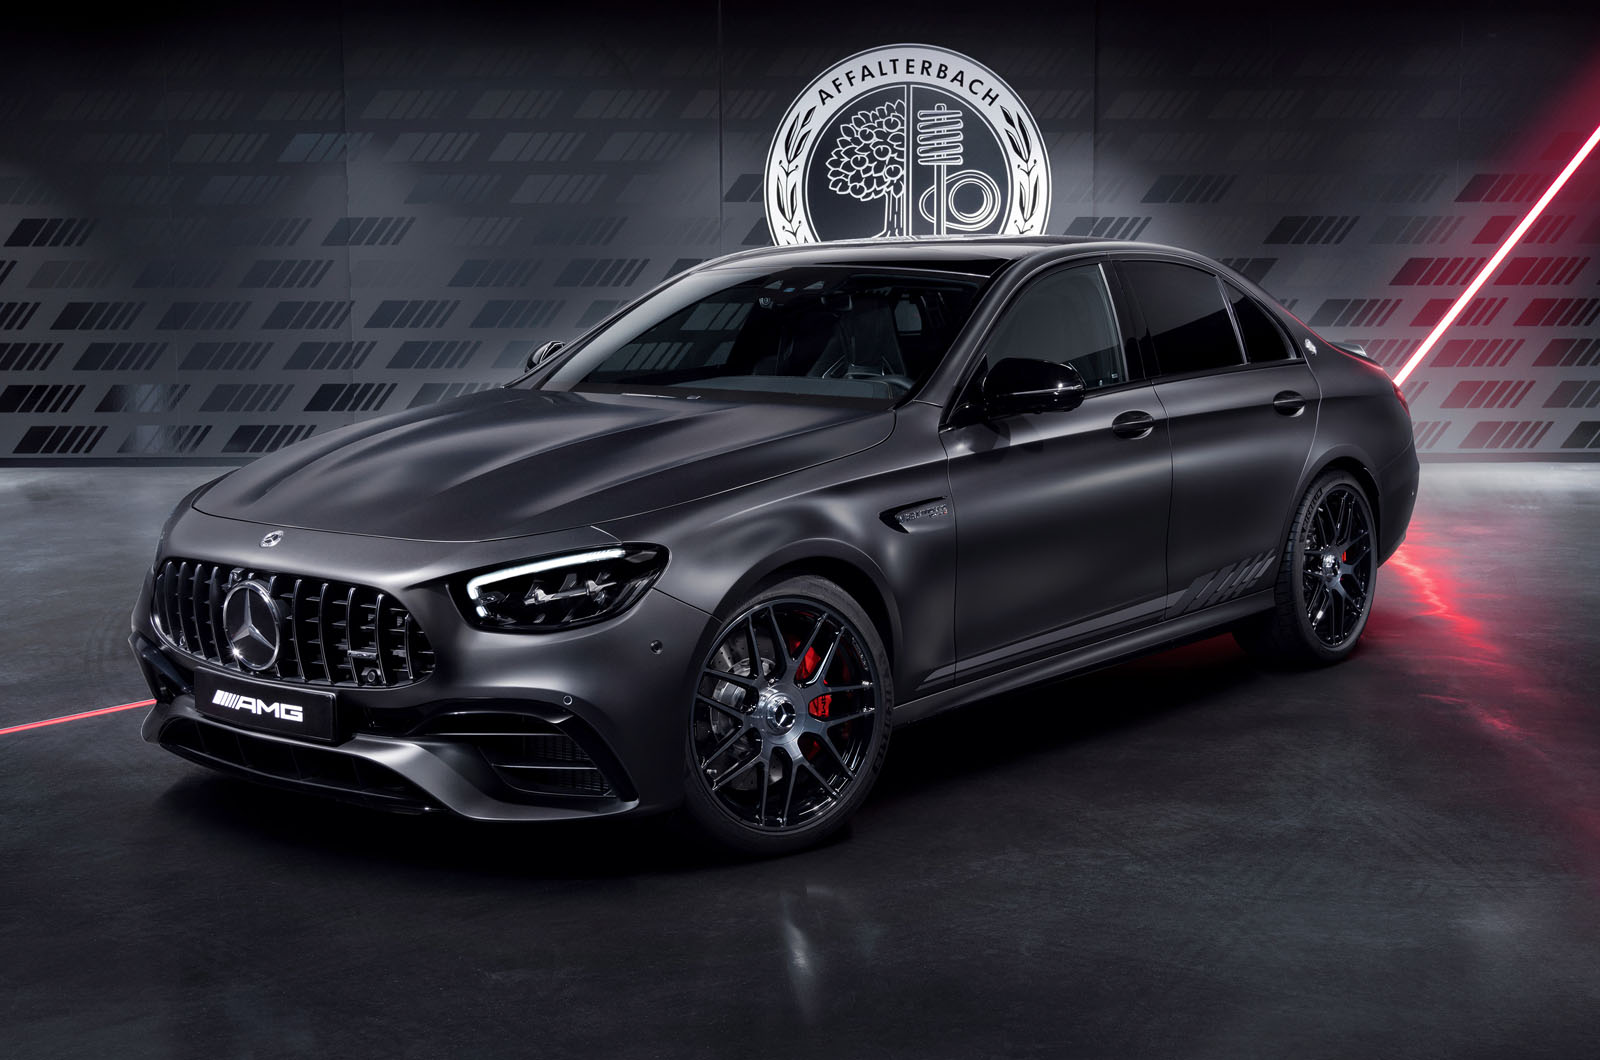 MercedesAMG E63 Final Edition ends 36 years of pureV8 saloons Autocar